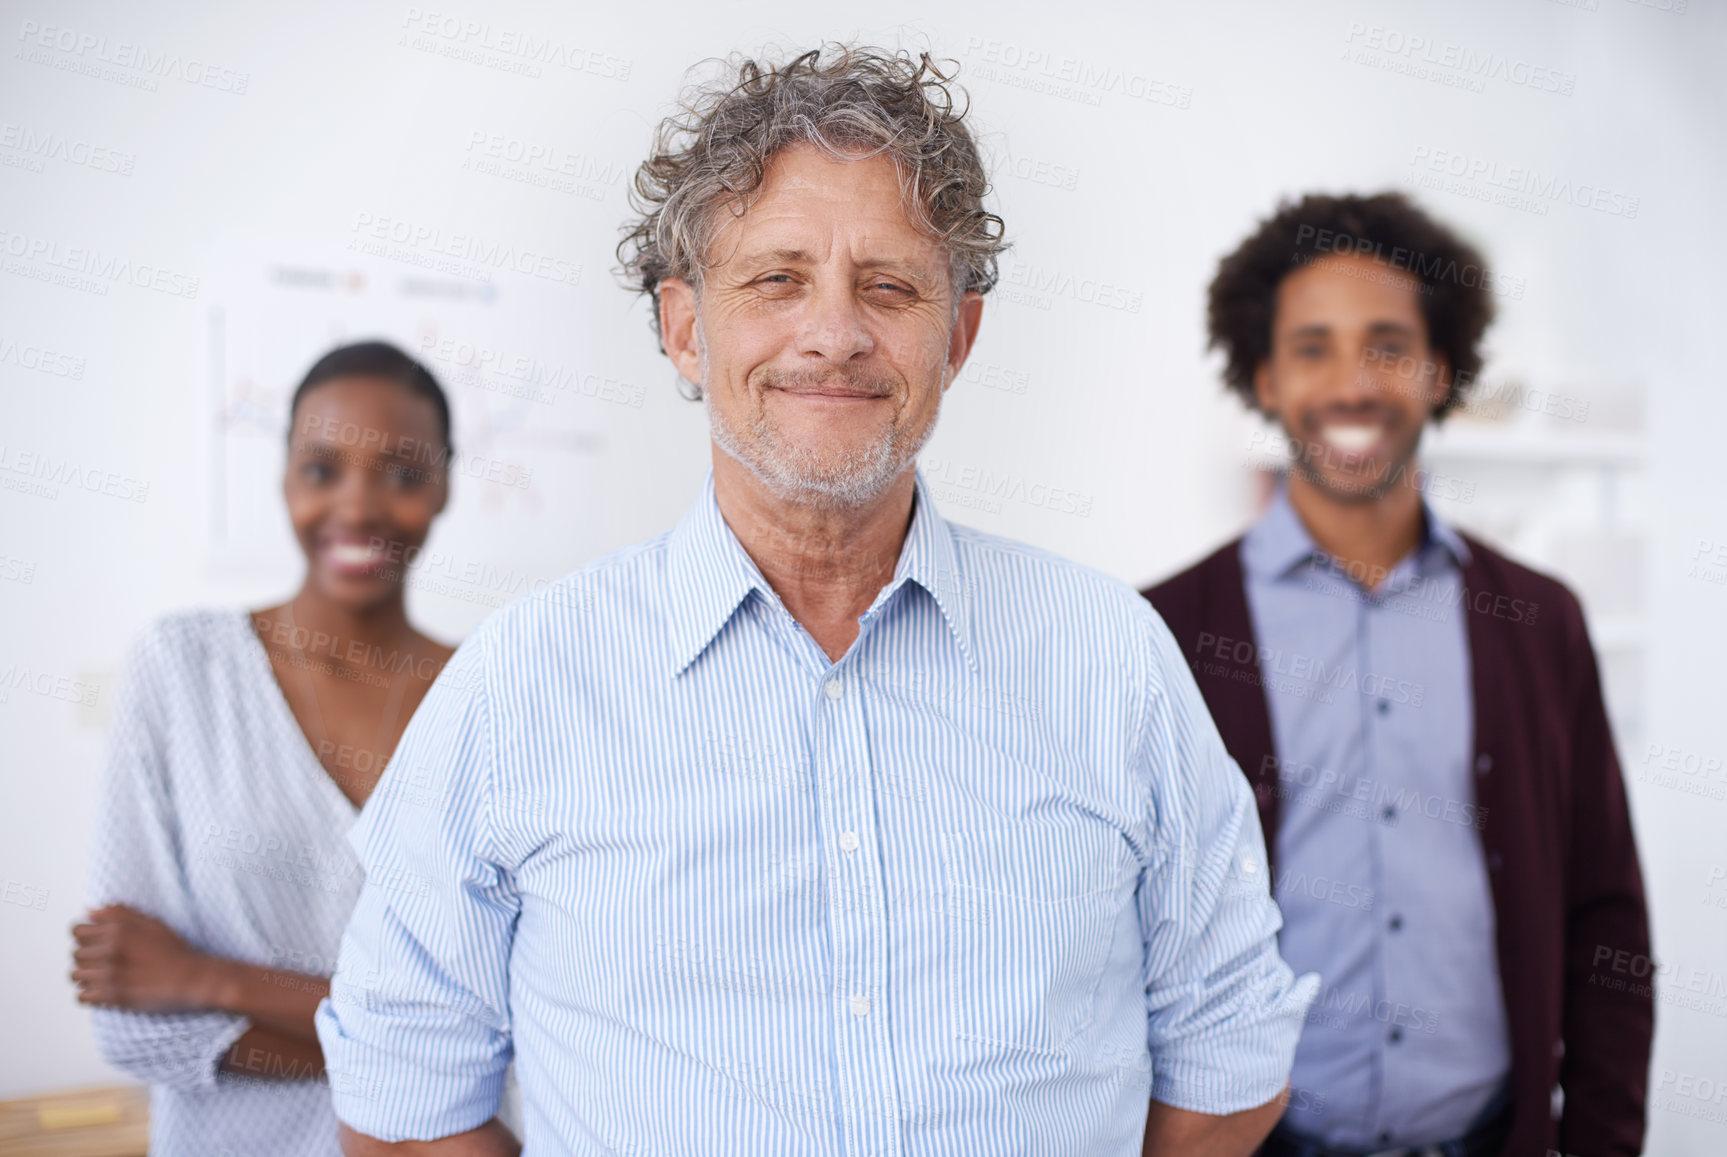 Buy stock photo A portrait of an happy team of coworkers standing in an office